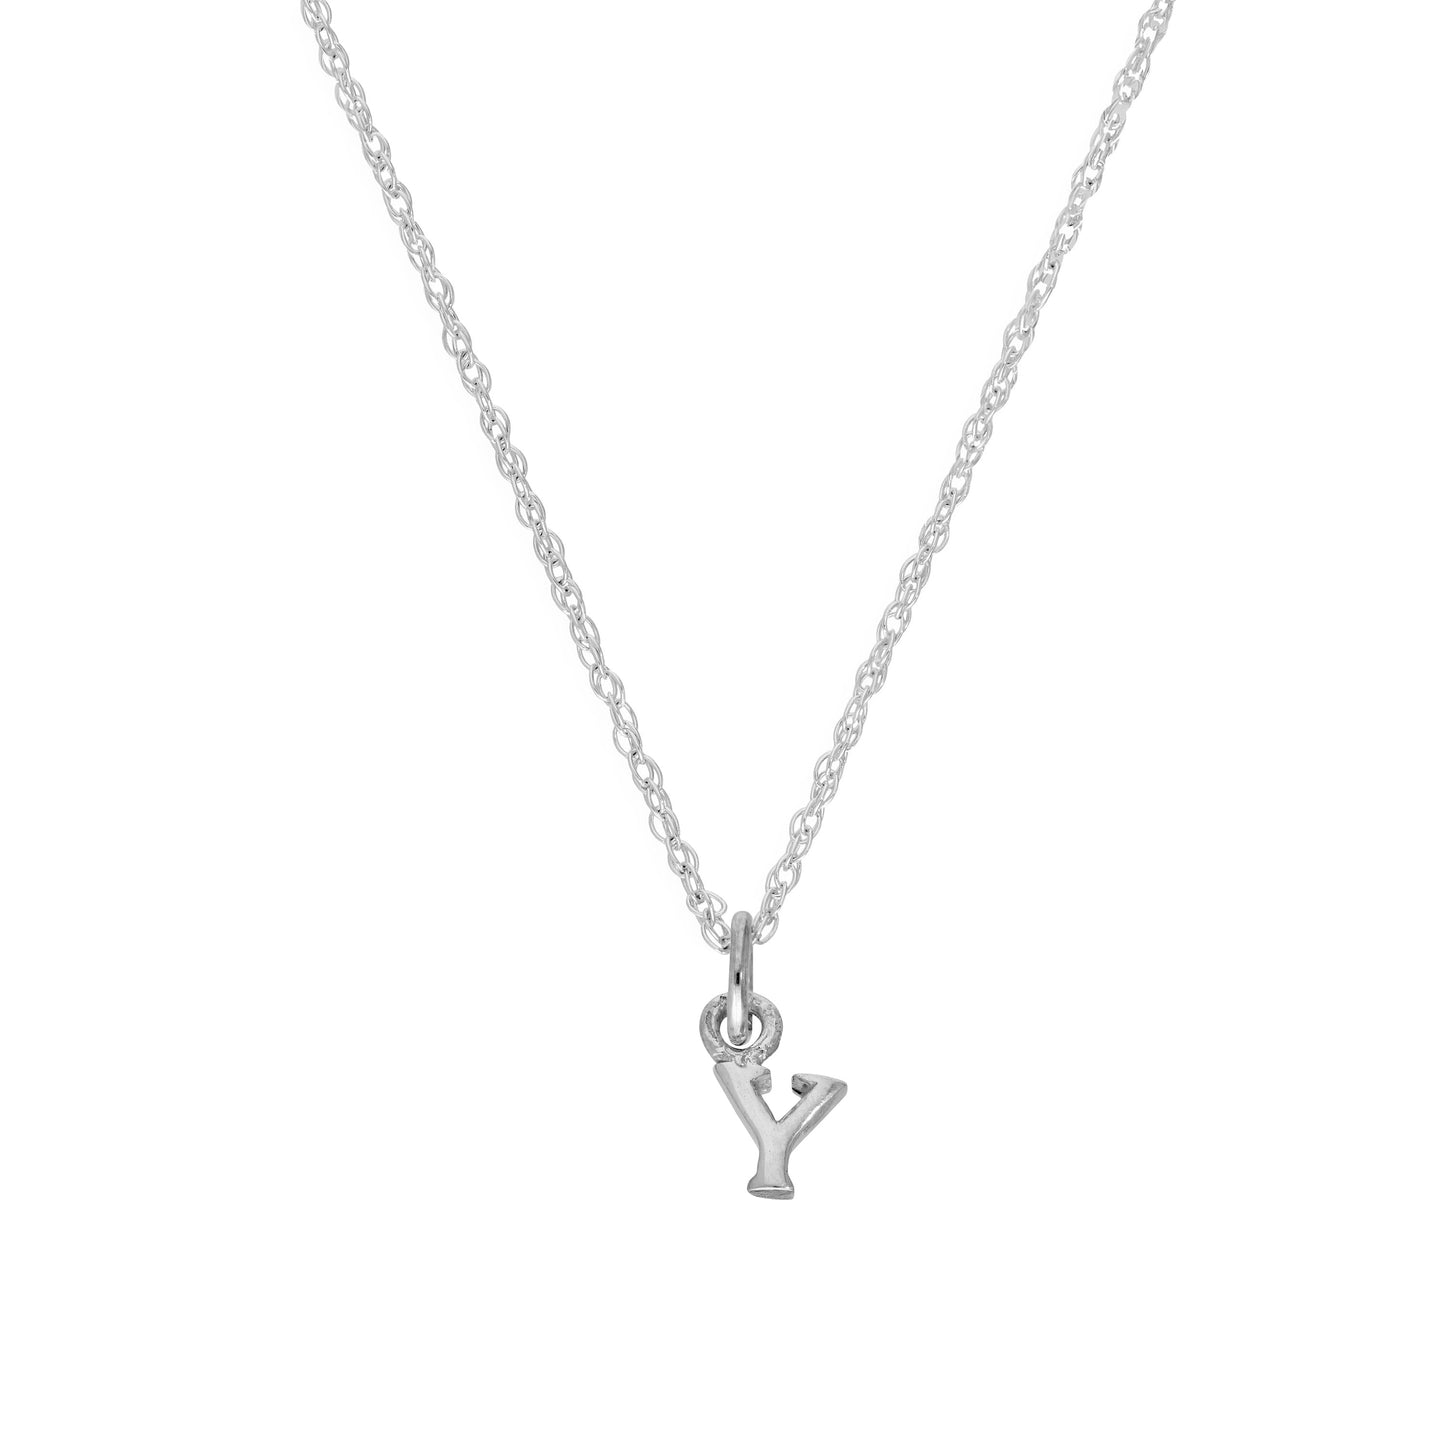 Tiny Sterling Silver Alphabet Letter Y Pendant Necklace 14 - 22 Inches